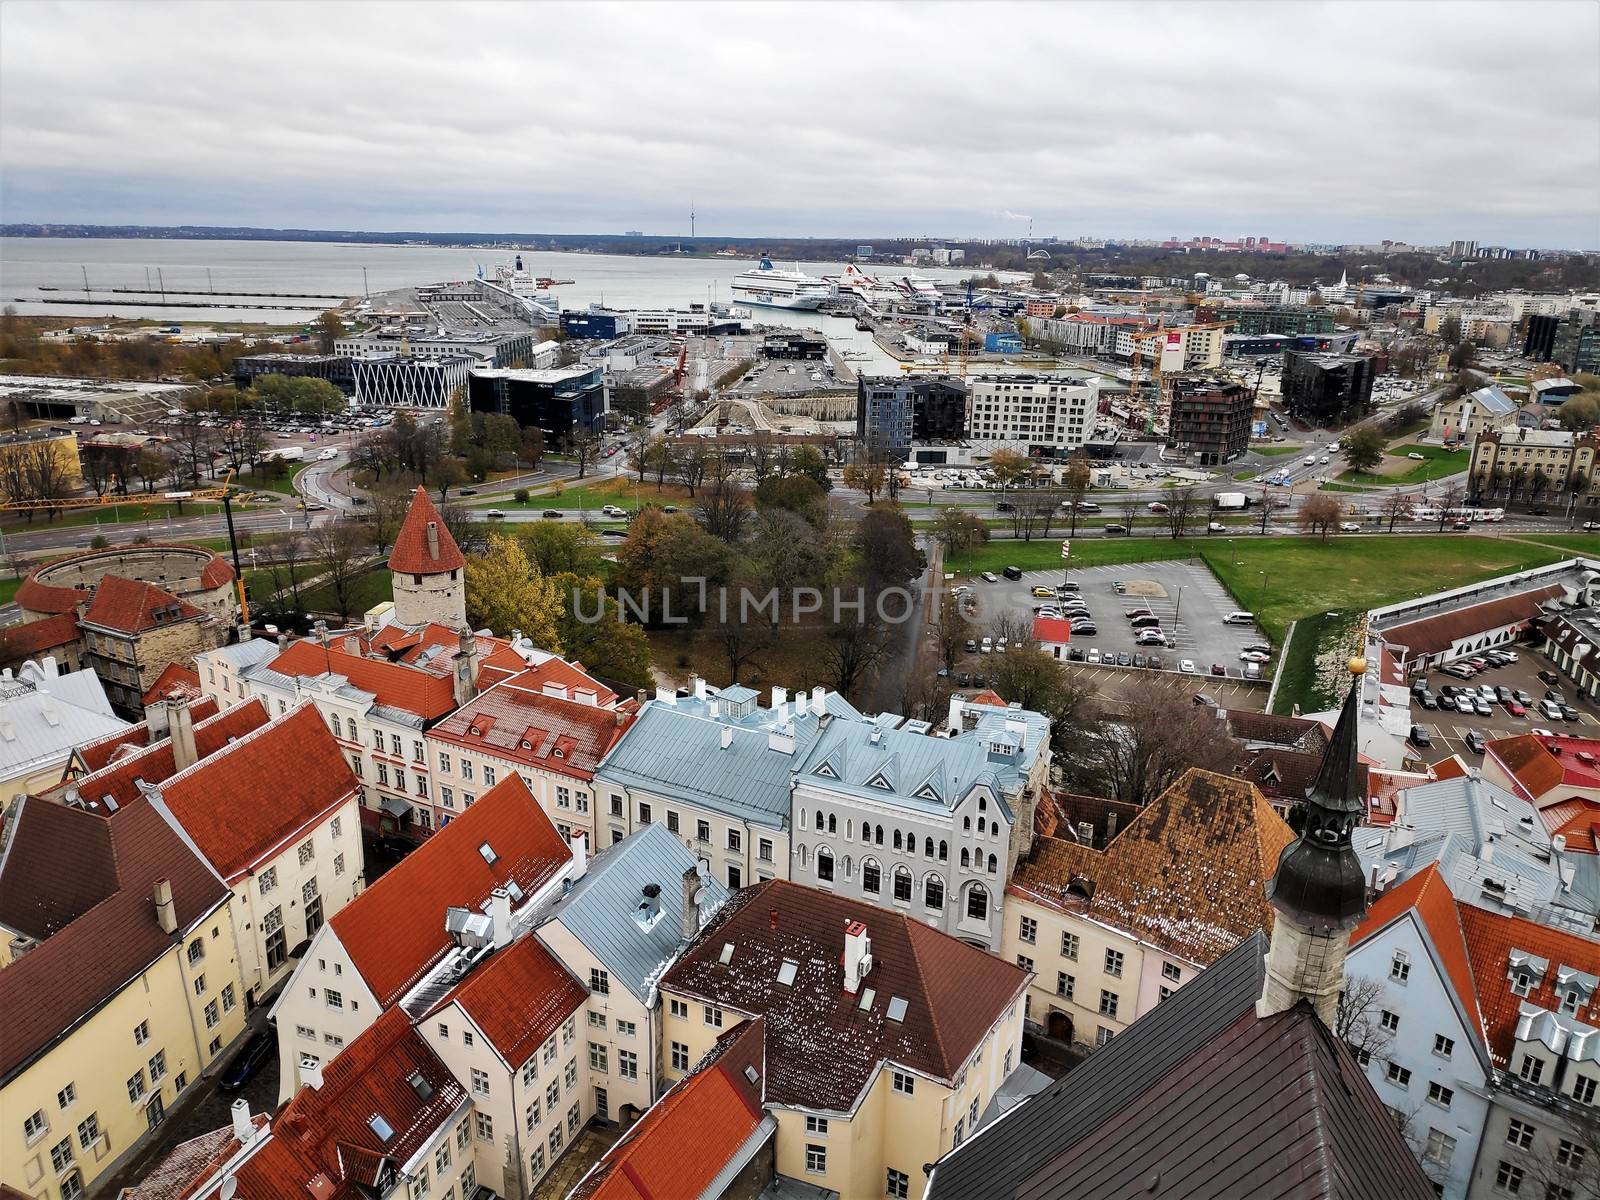 View from St Olaf's church to the port of Tallinn, Estonia